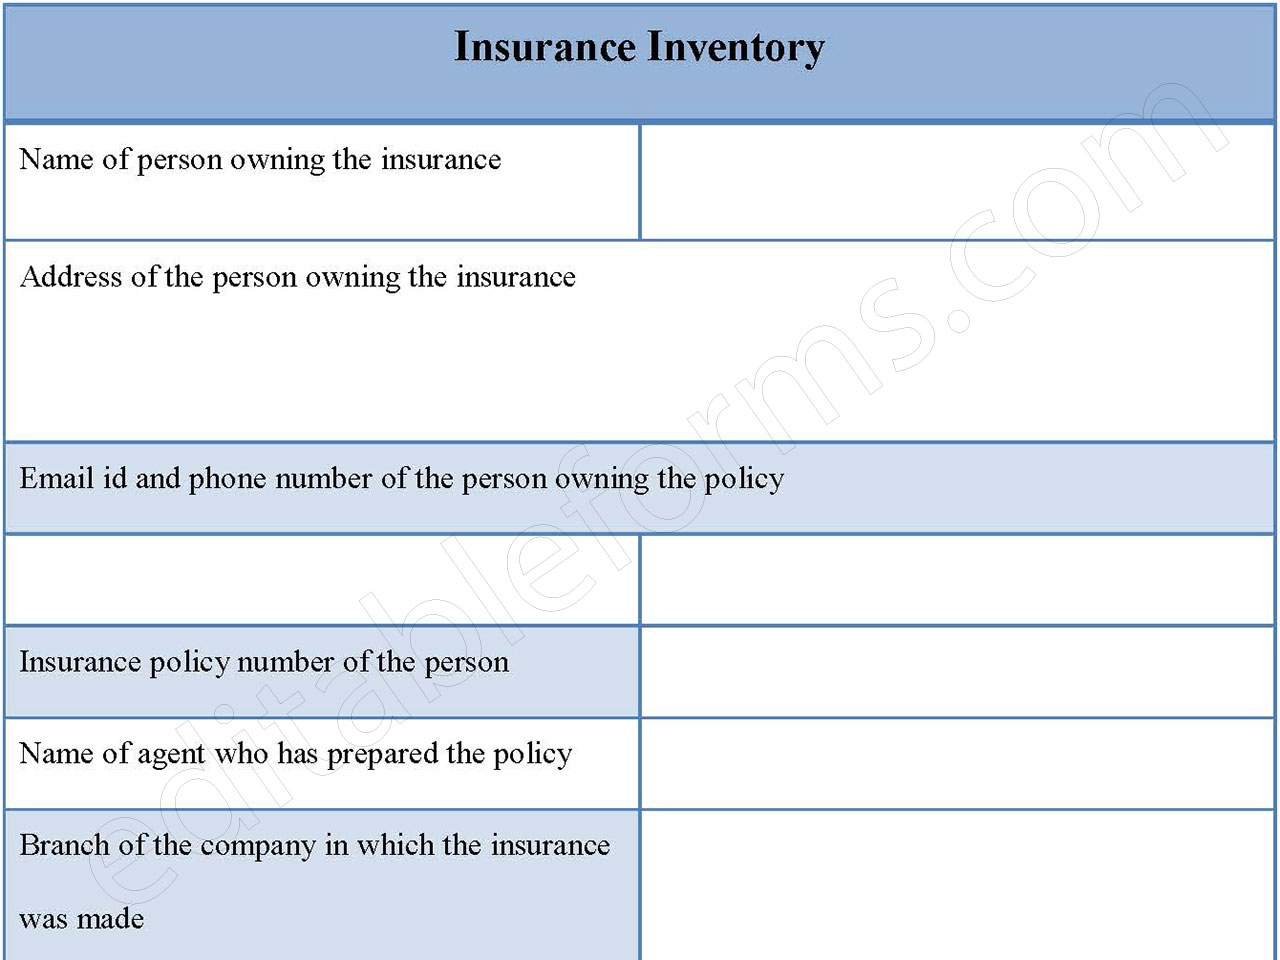 Insurance Inventory Form